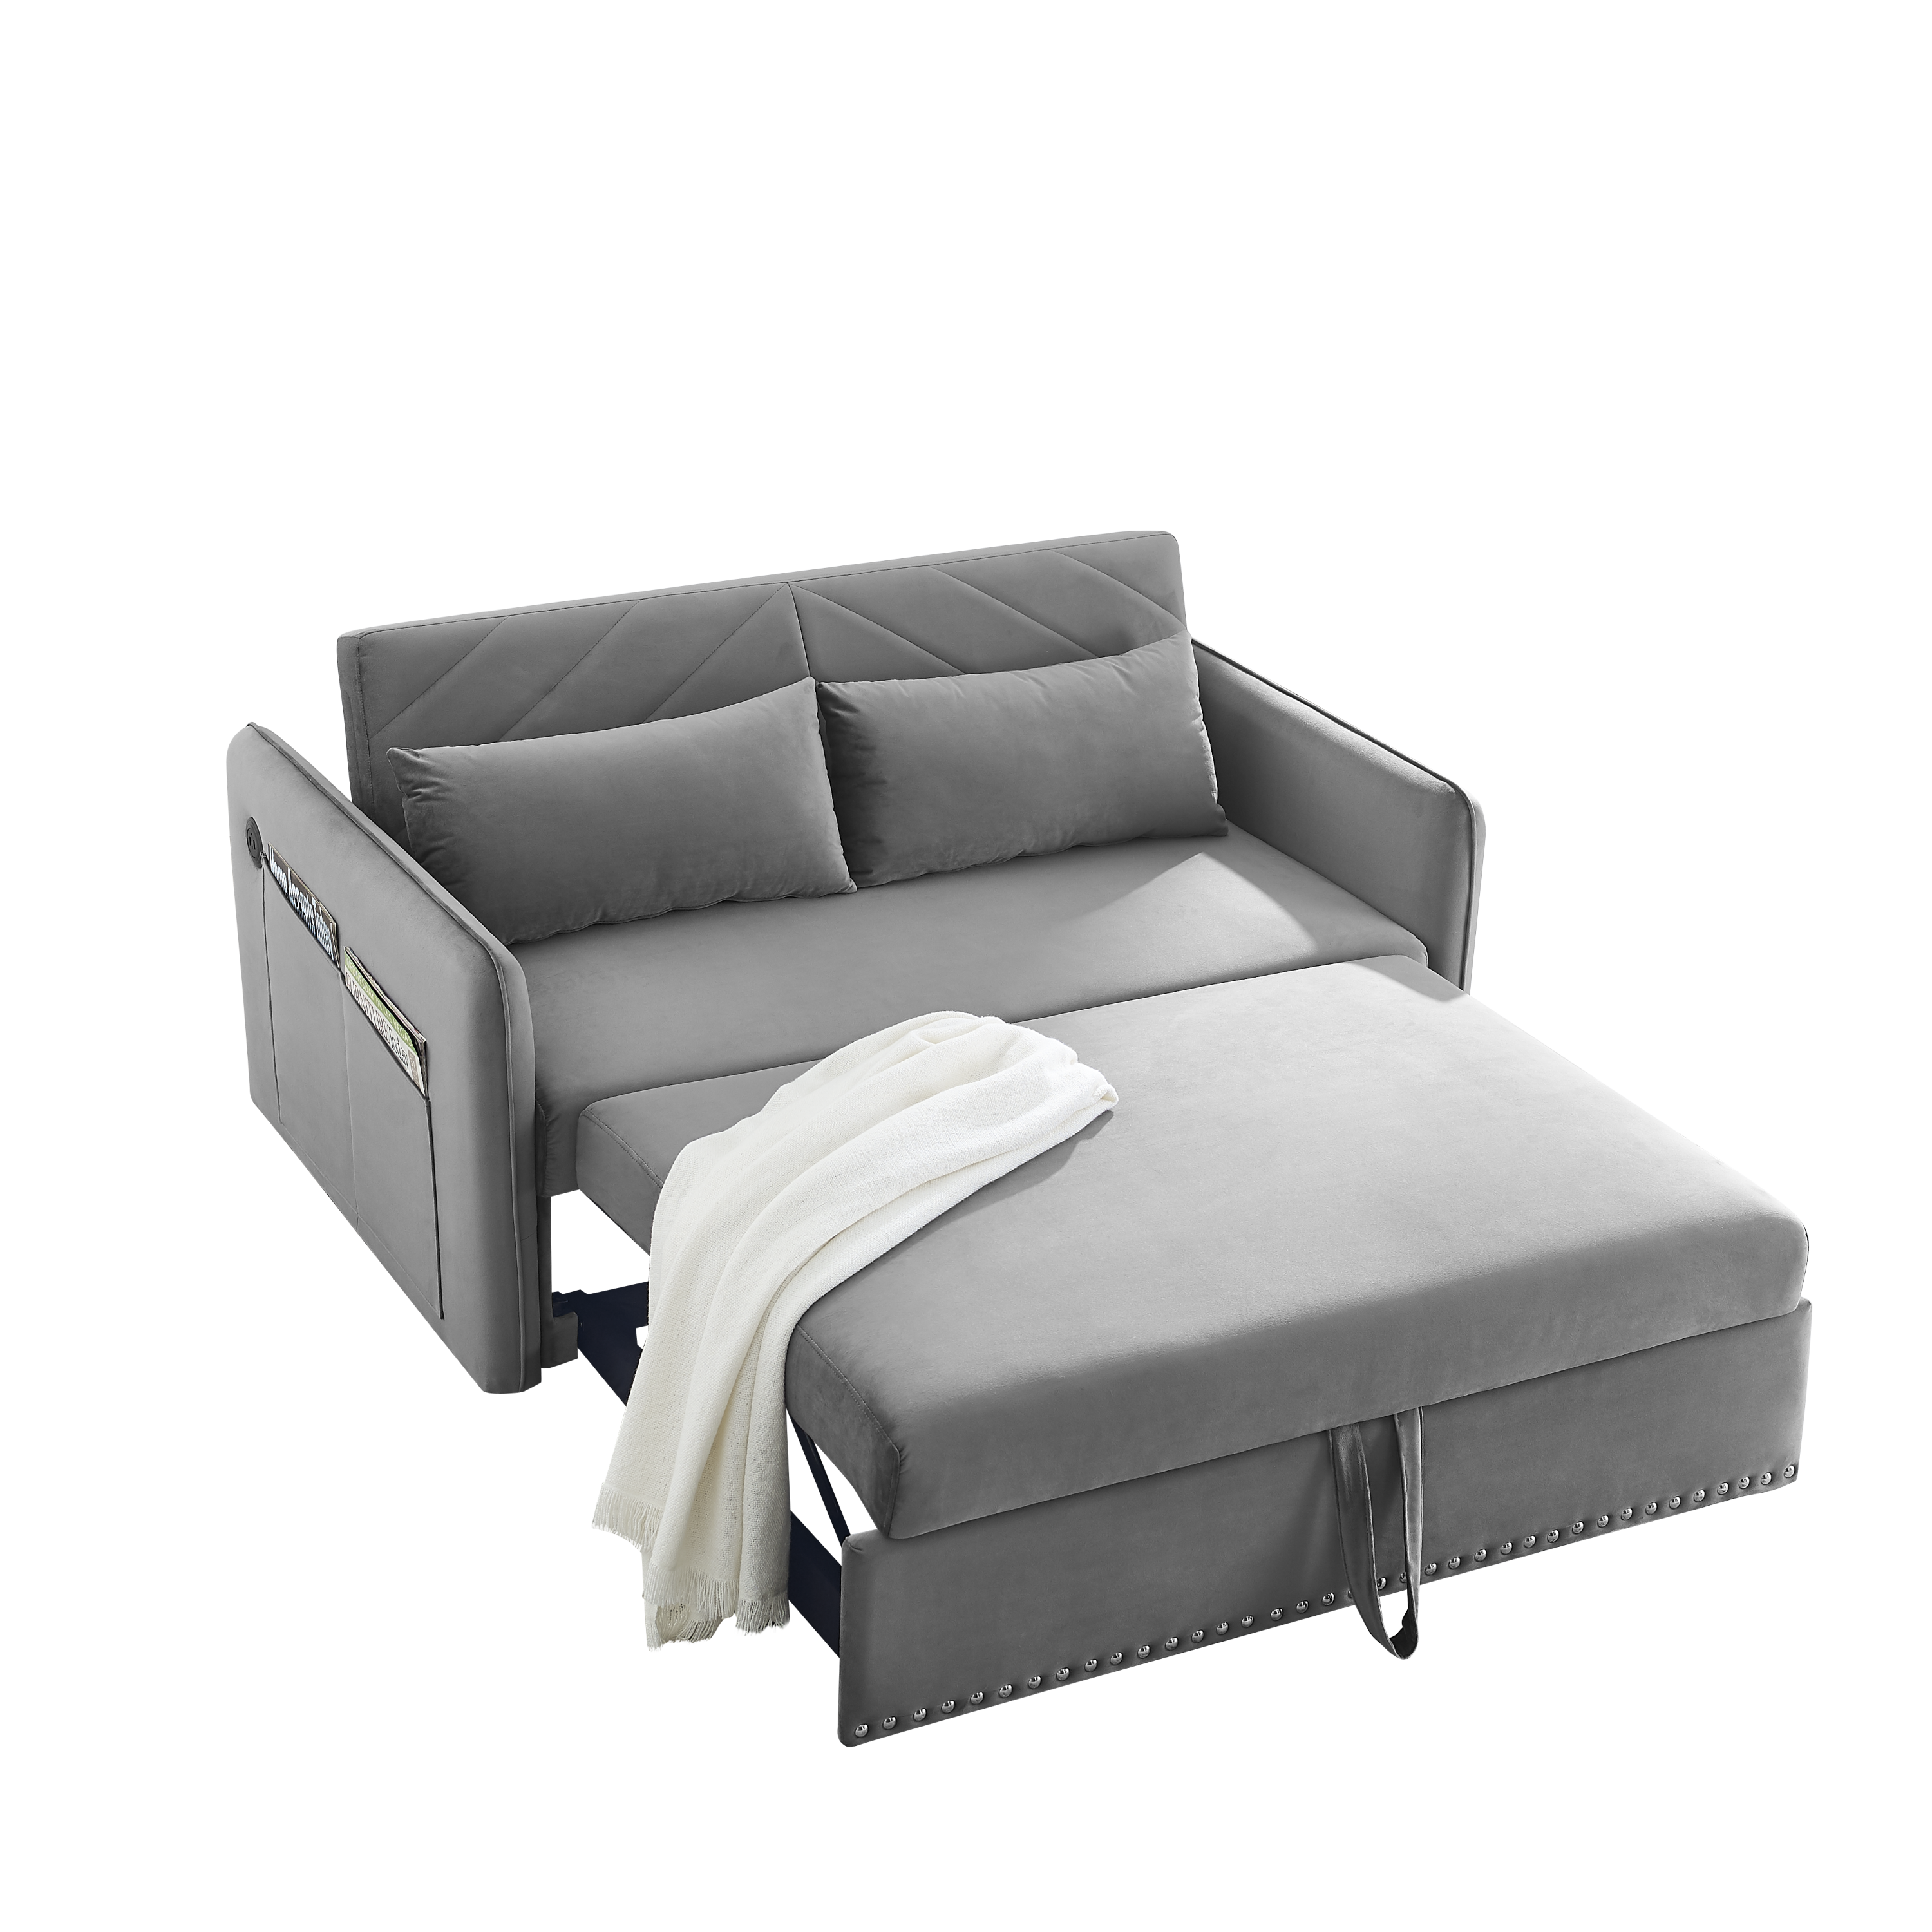 🆓🚛 3-In-1 Adjustable Sleeper With Pull-Out Bed, 2 Lumbar Pillows and Side Pocket, Soft Velvet Convertible Sleeper Sofa Bed, Gray